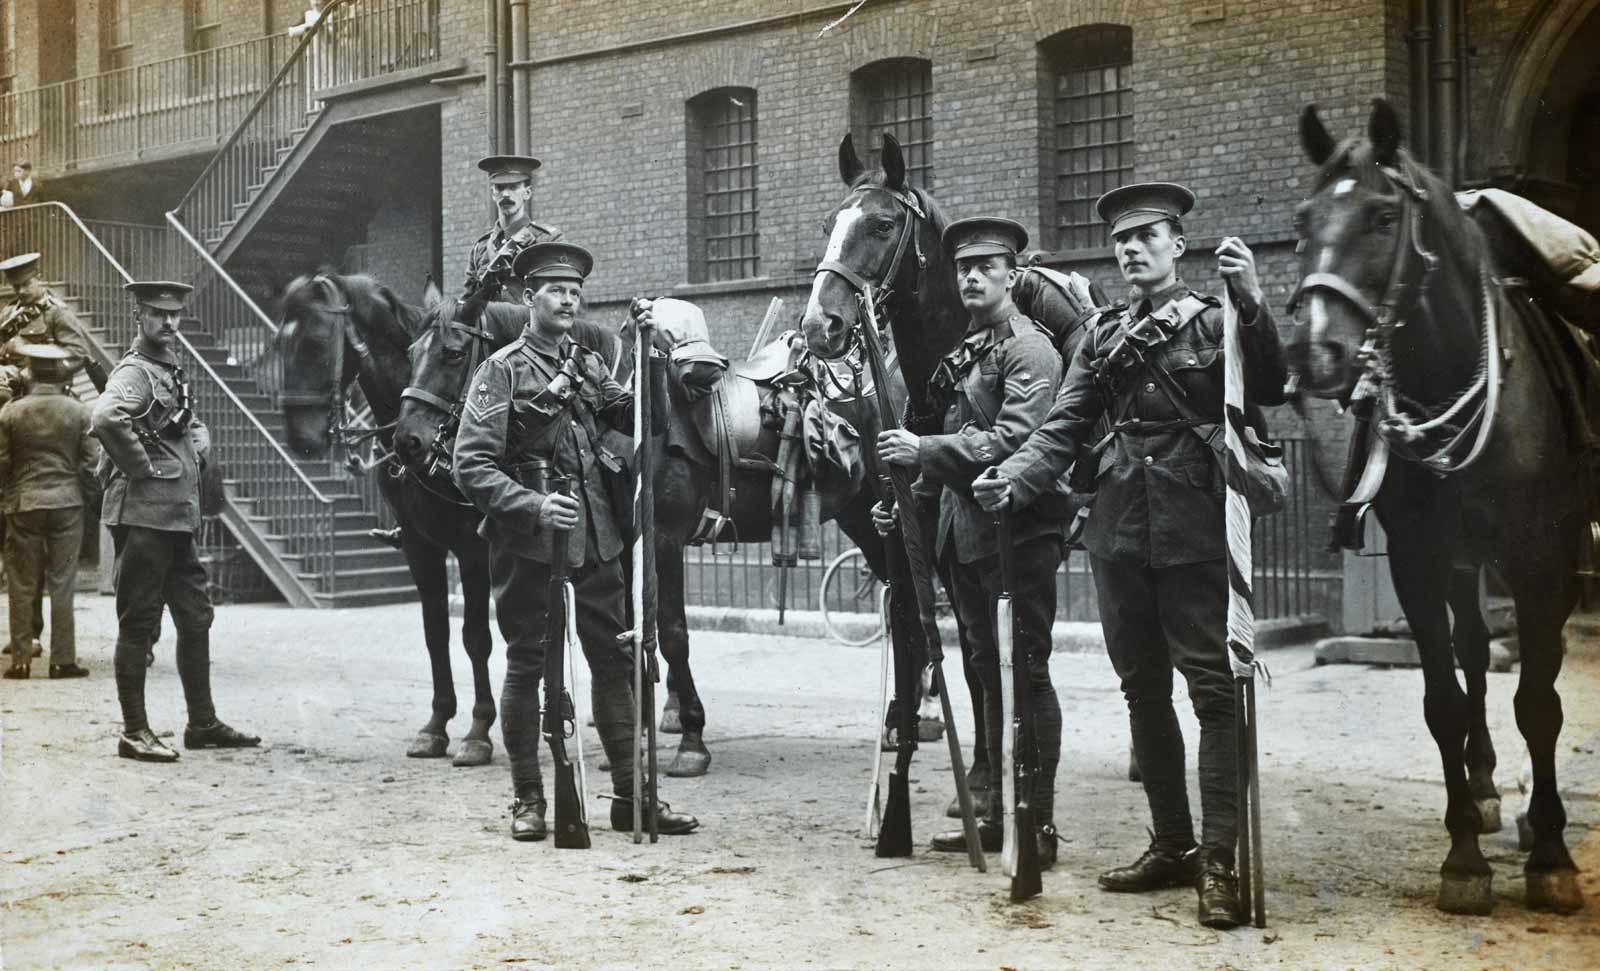 1st Life Guards mobilising at Knightsbridge Barracks to leave for France, August 1914, by Christina Broom